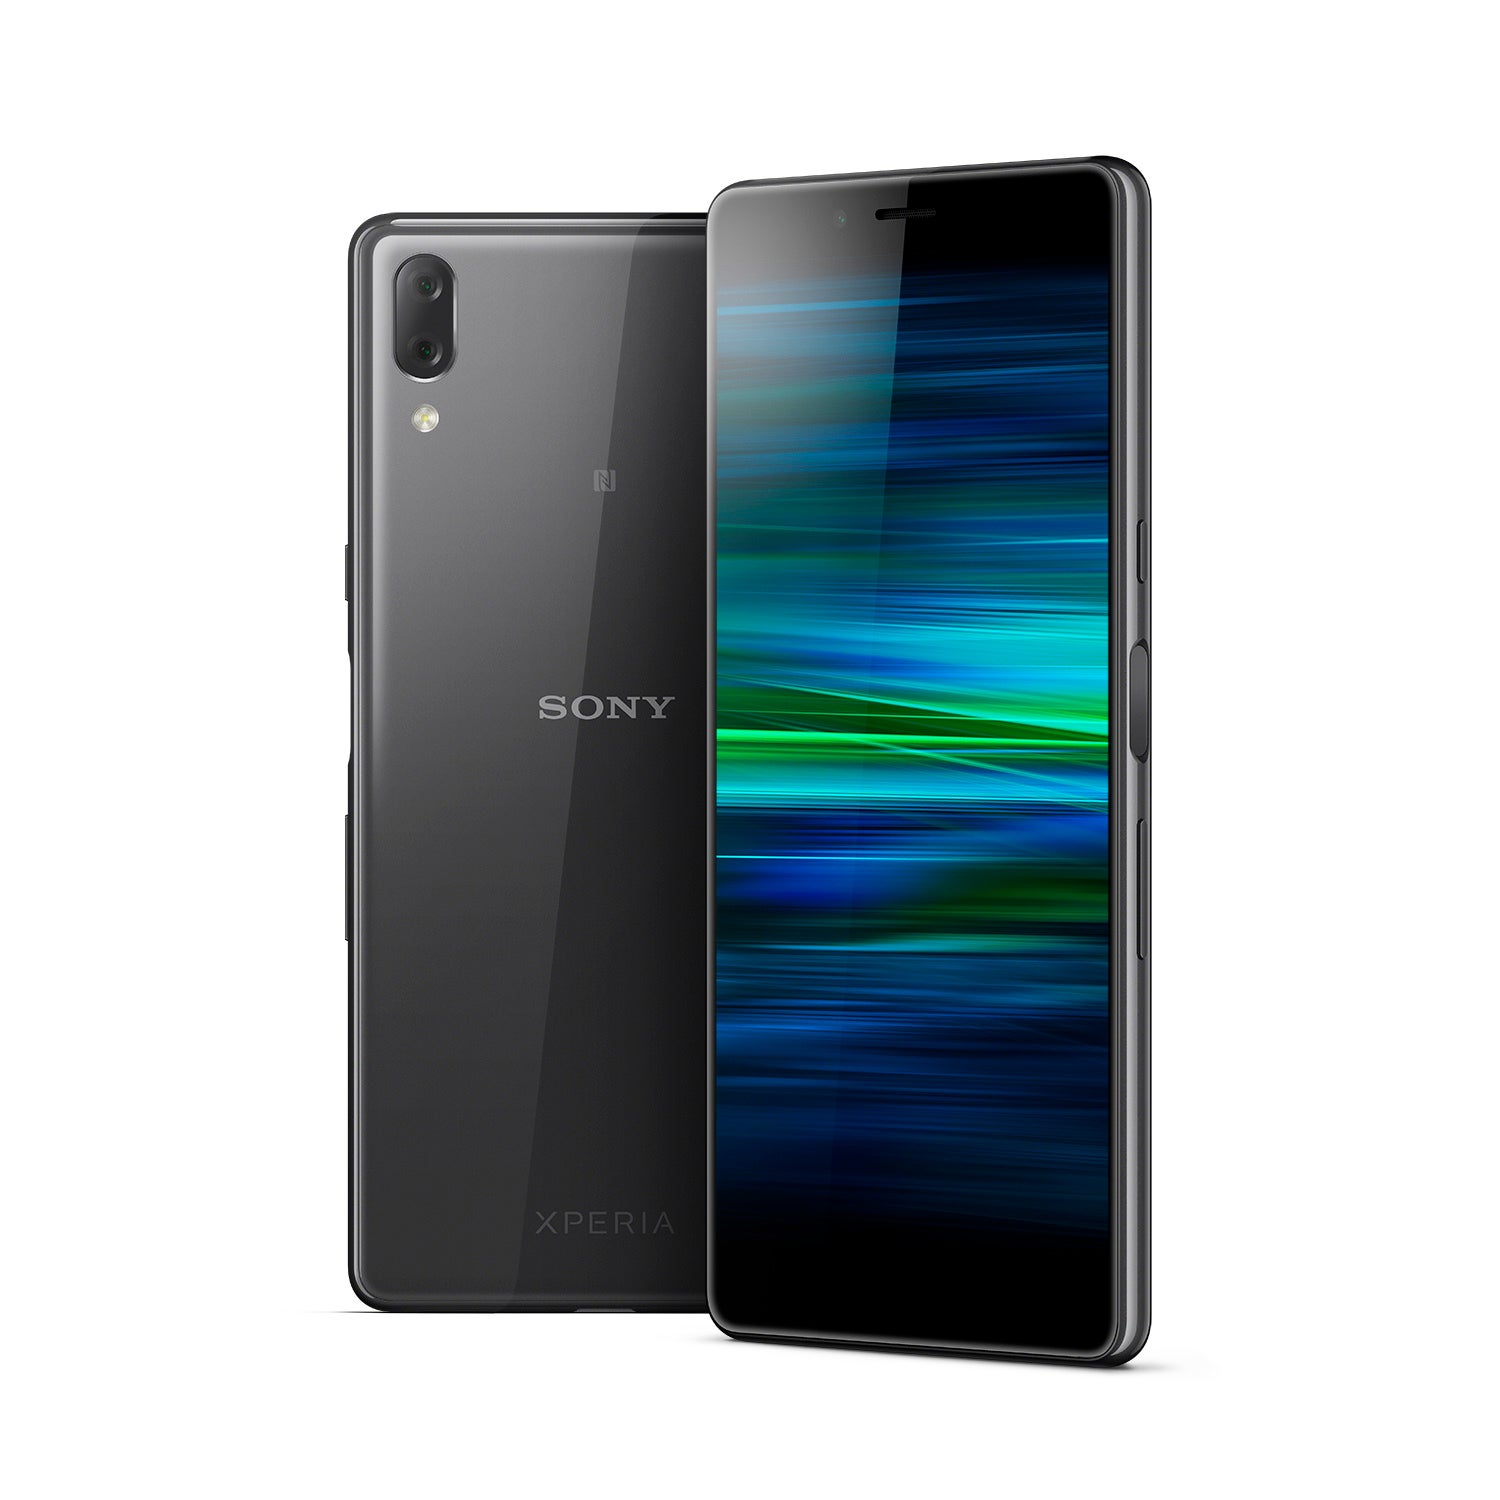 Sony's new entry-level smartphone is here! The Xperia L3 is for Sony lovers on a budget